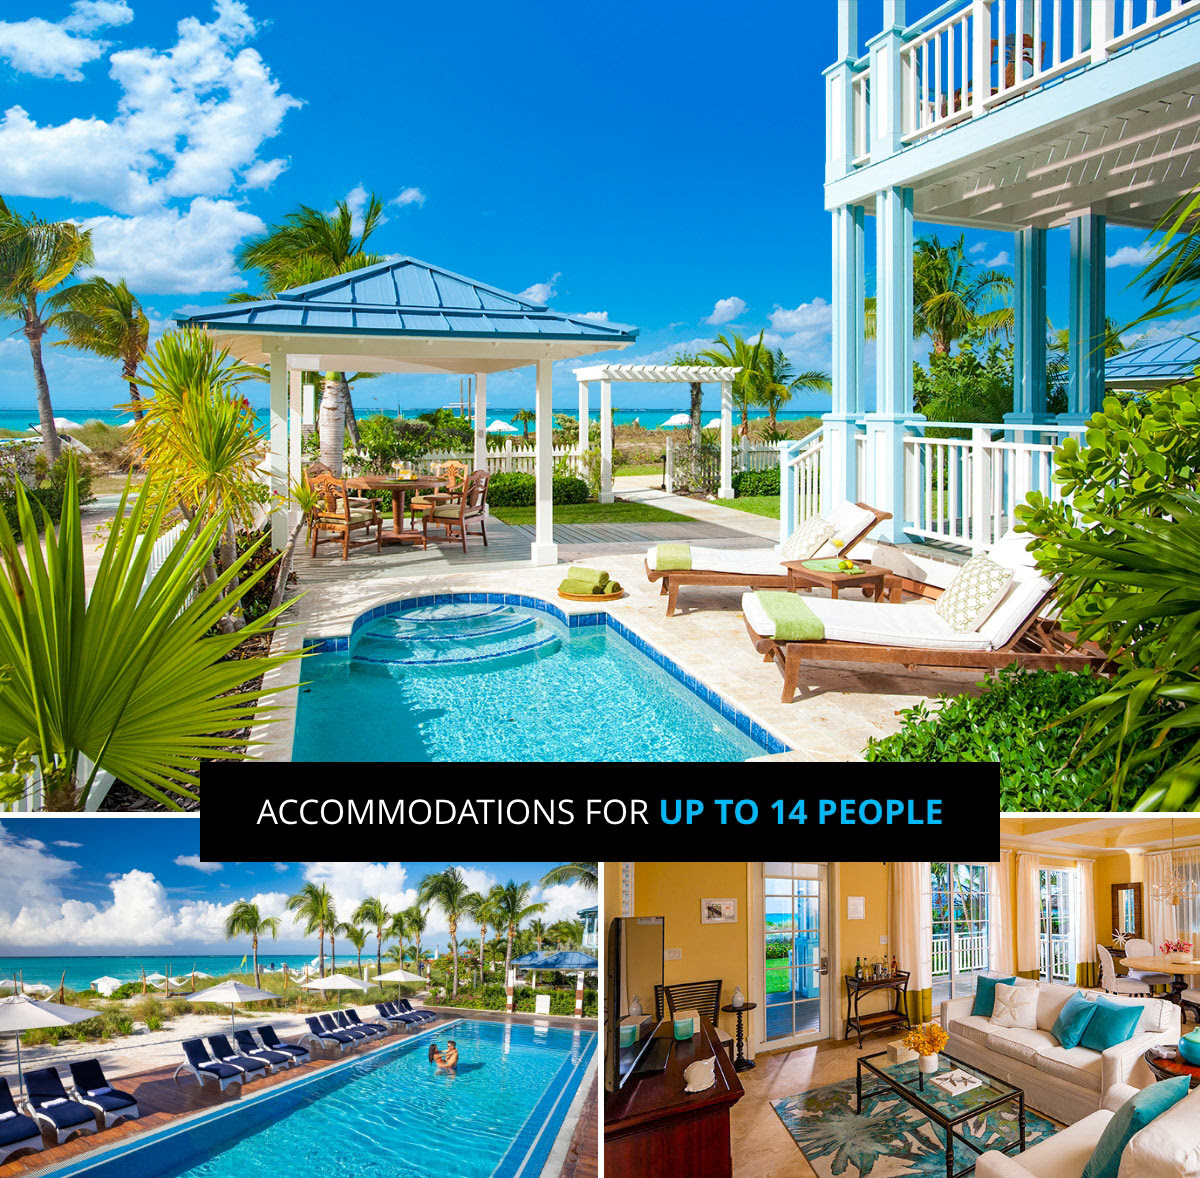 Turks & Caicos Beaches Accommodations For Up to 14 People'